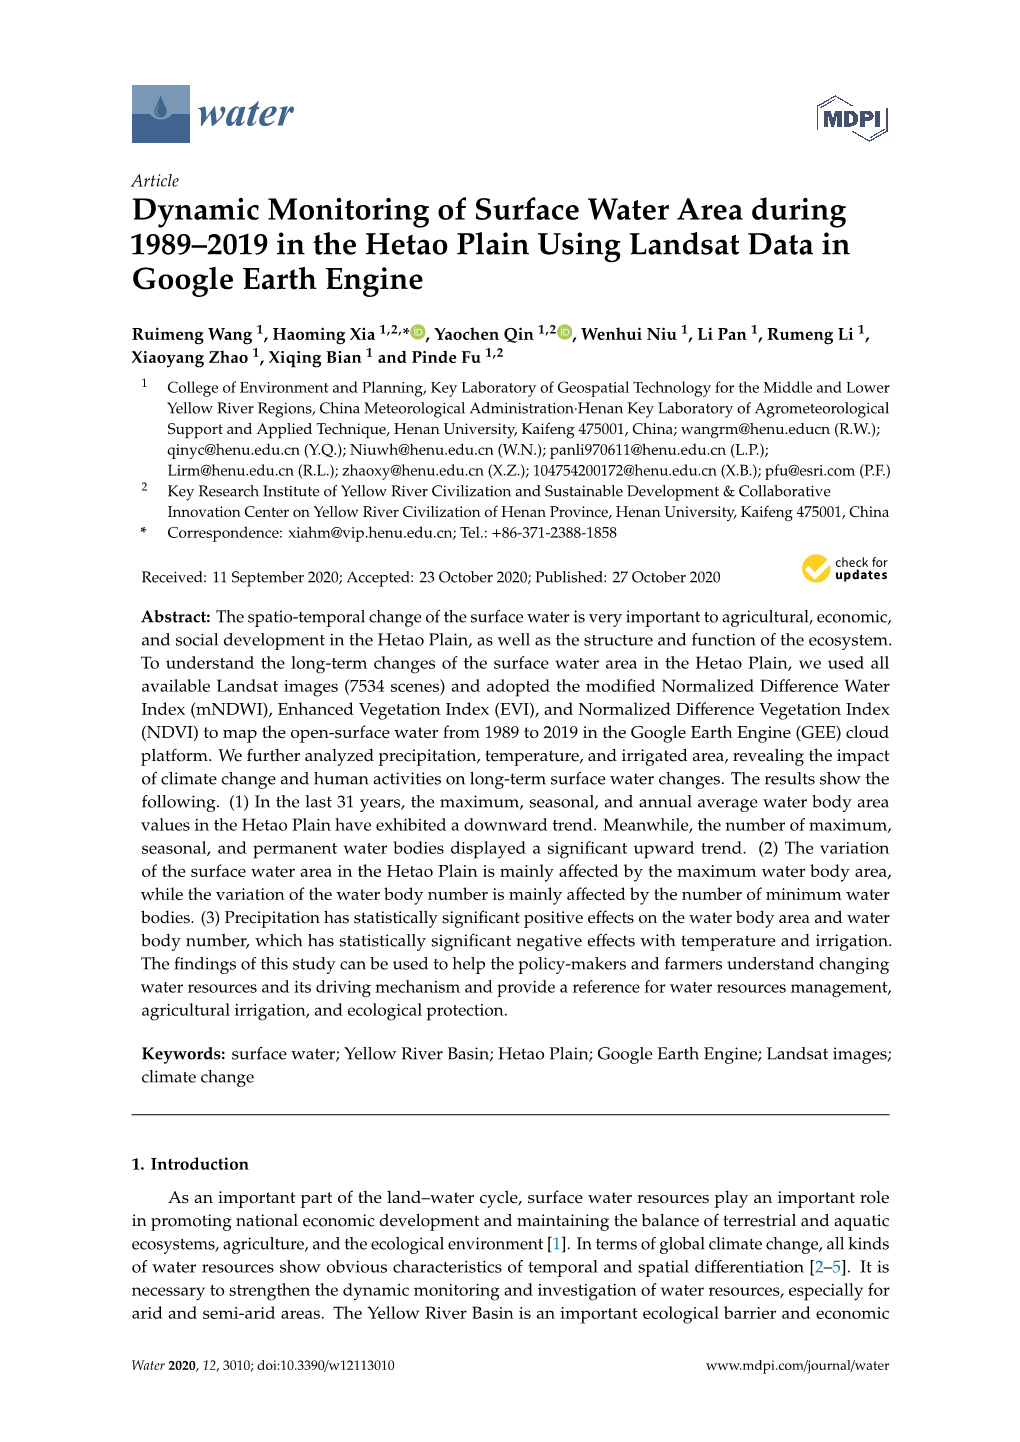 Dynamic Monitoring of Surface Water Area During 1989–2019 in the Hetao Plain Using Landsat Data in Google Earth Engine